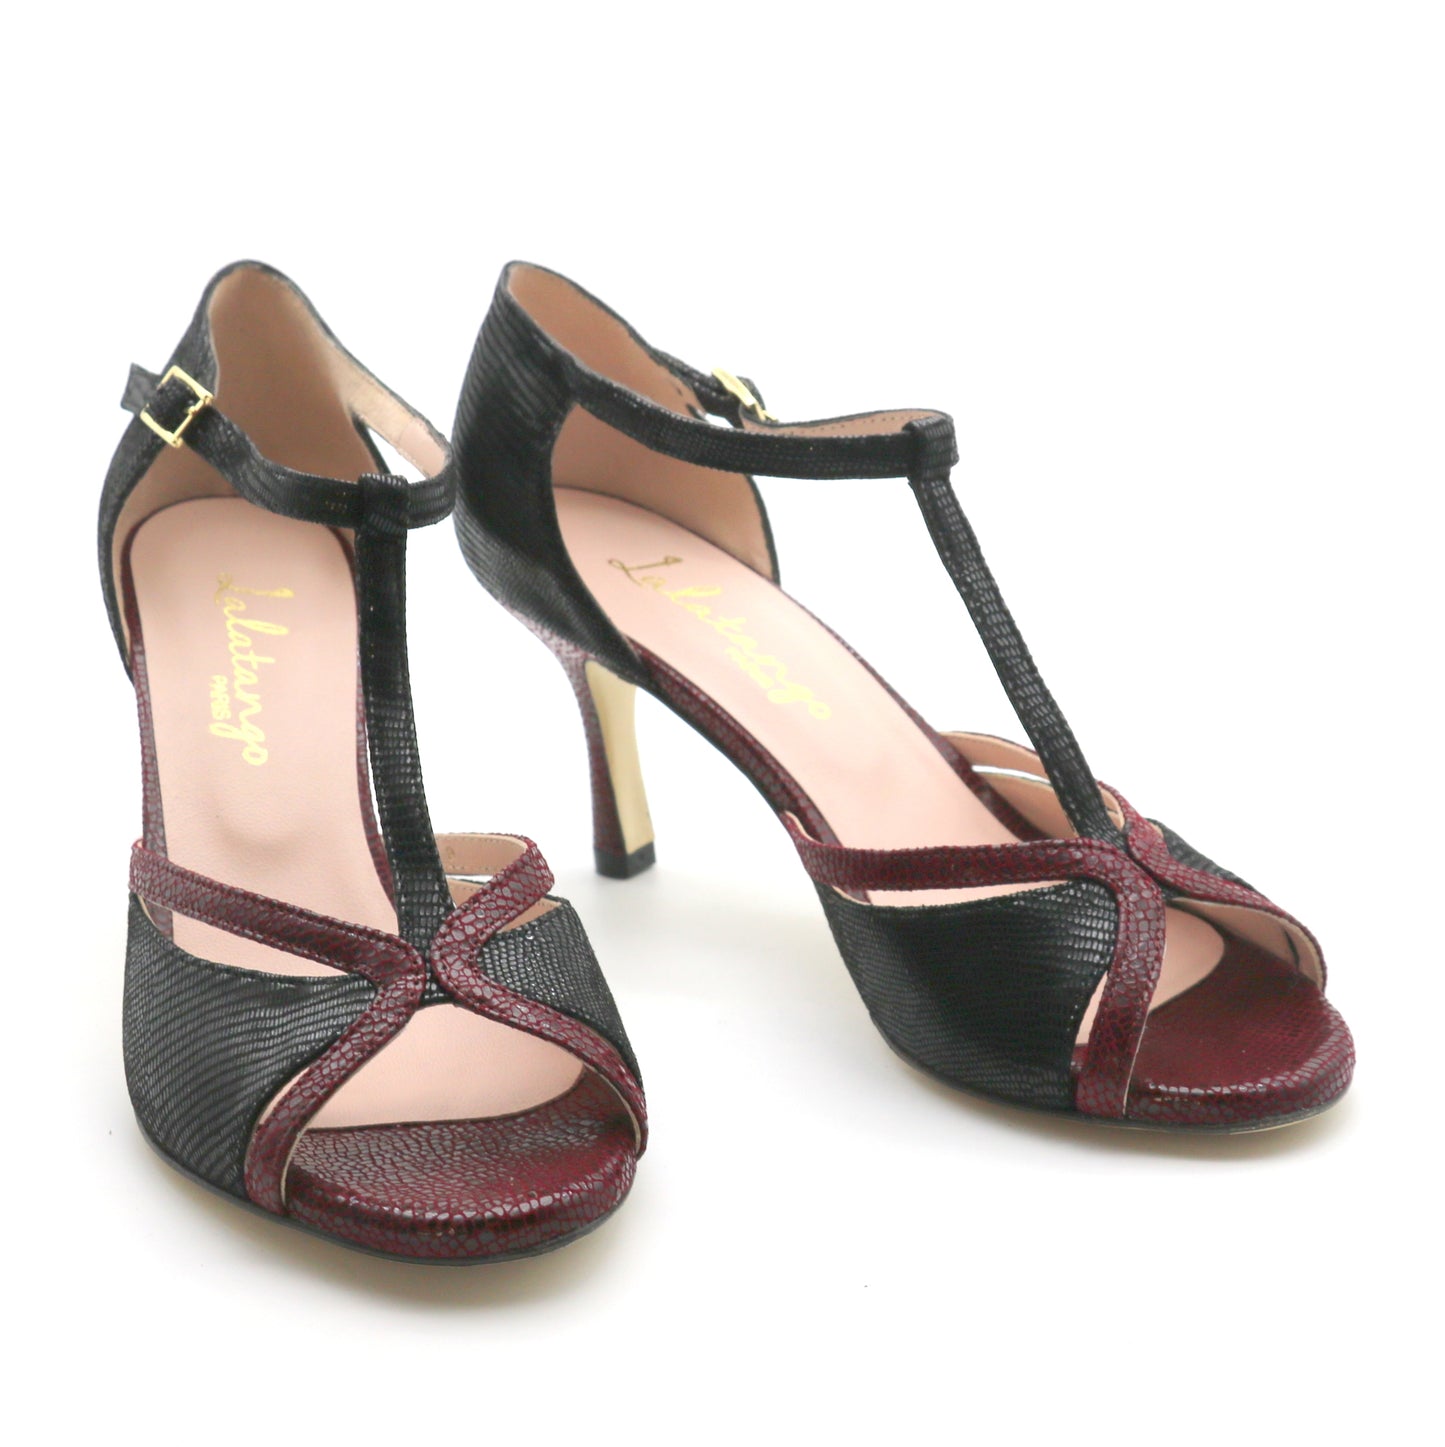 Coco black and burgundy snake style heels 7cm 